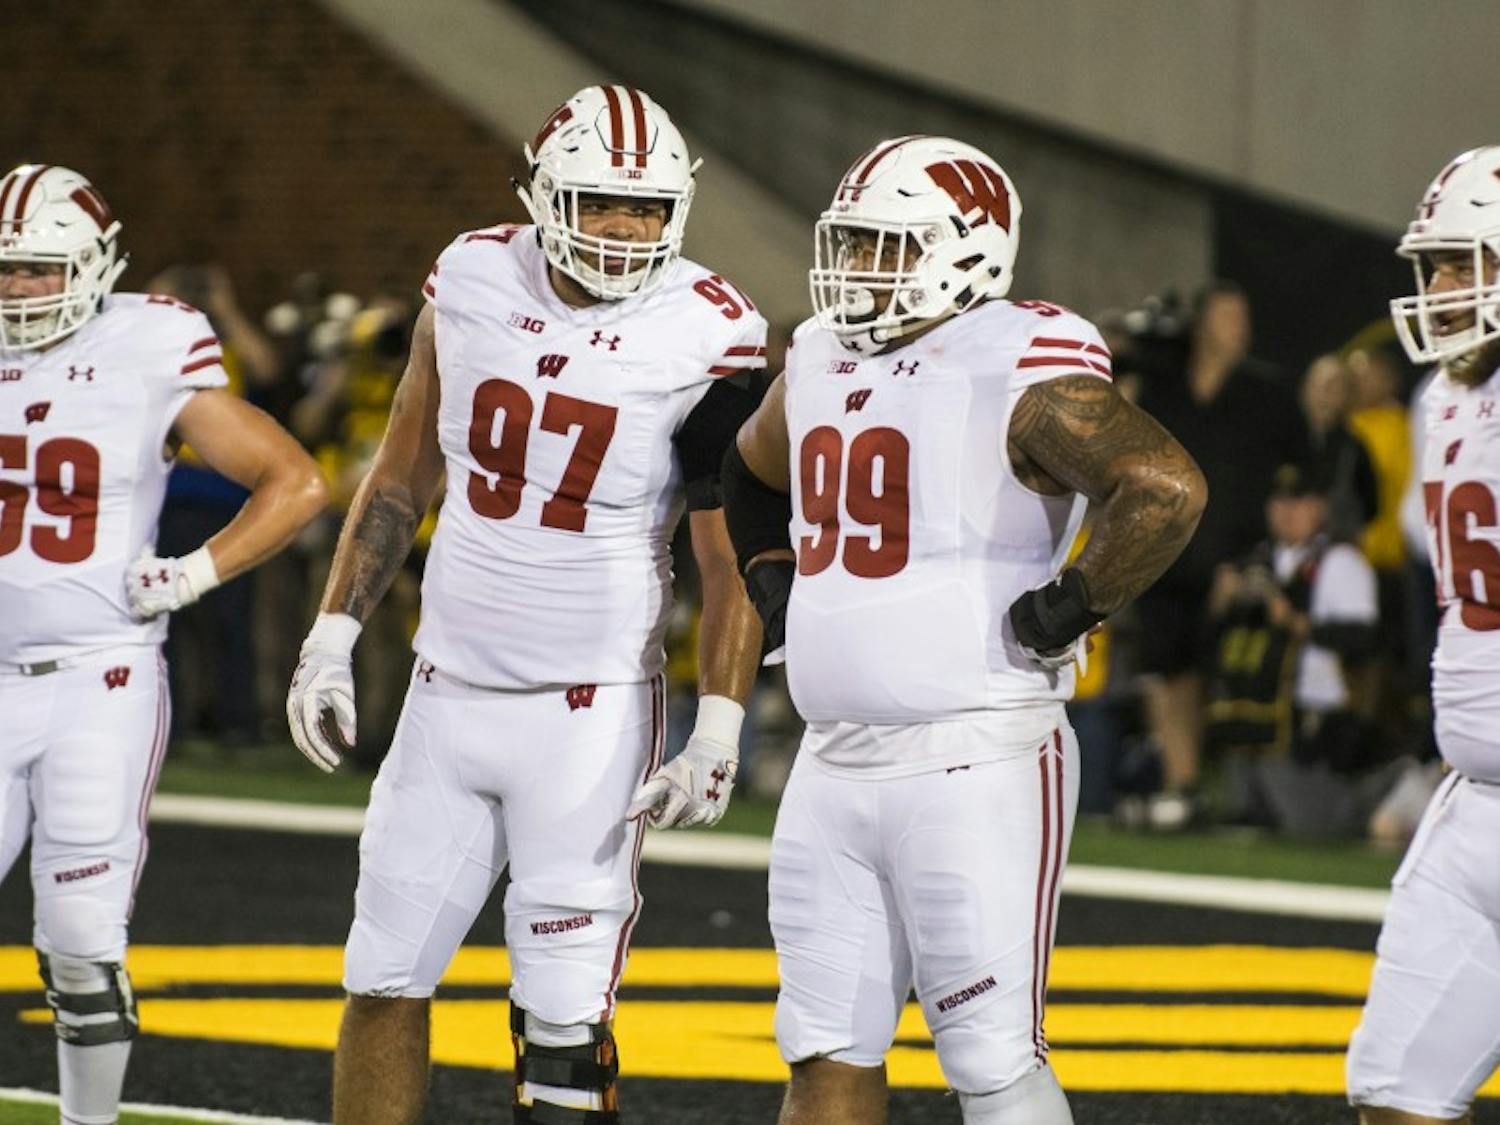 With four members of the secondary limited or out of practice this week, Wisconsin's front seven will need to maintain gap control to contain Illinois' potent zone-read attack.